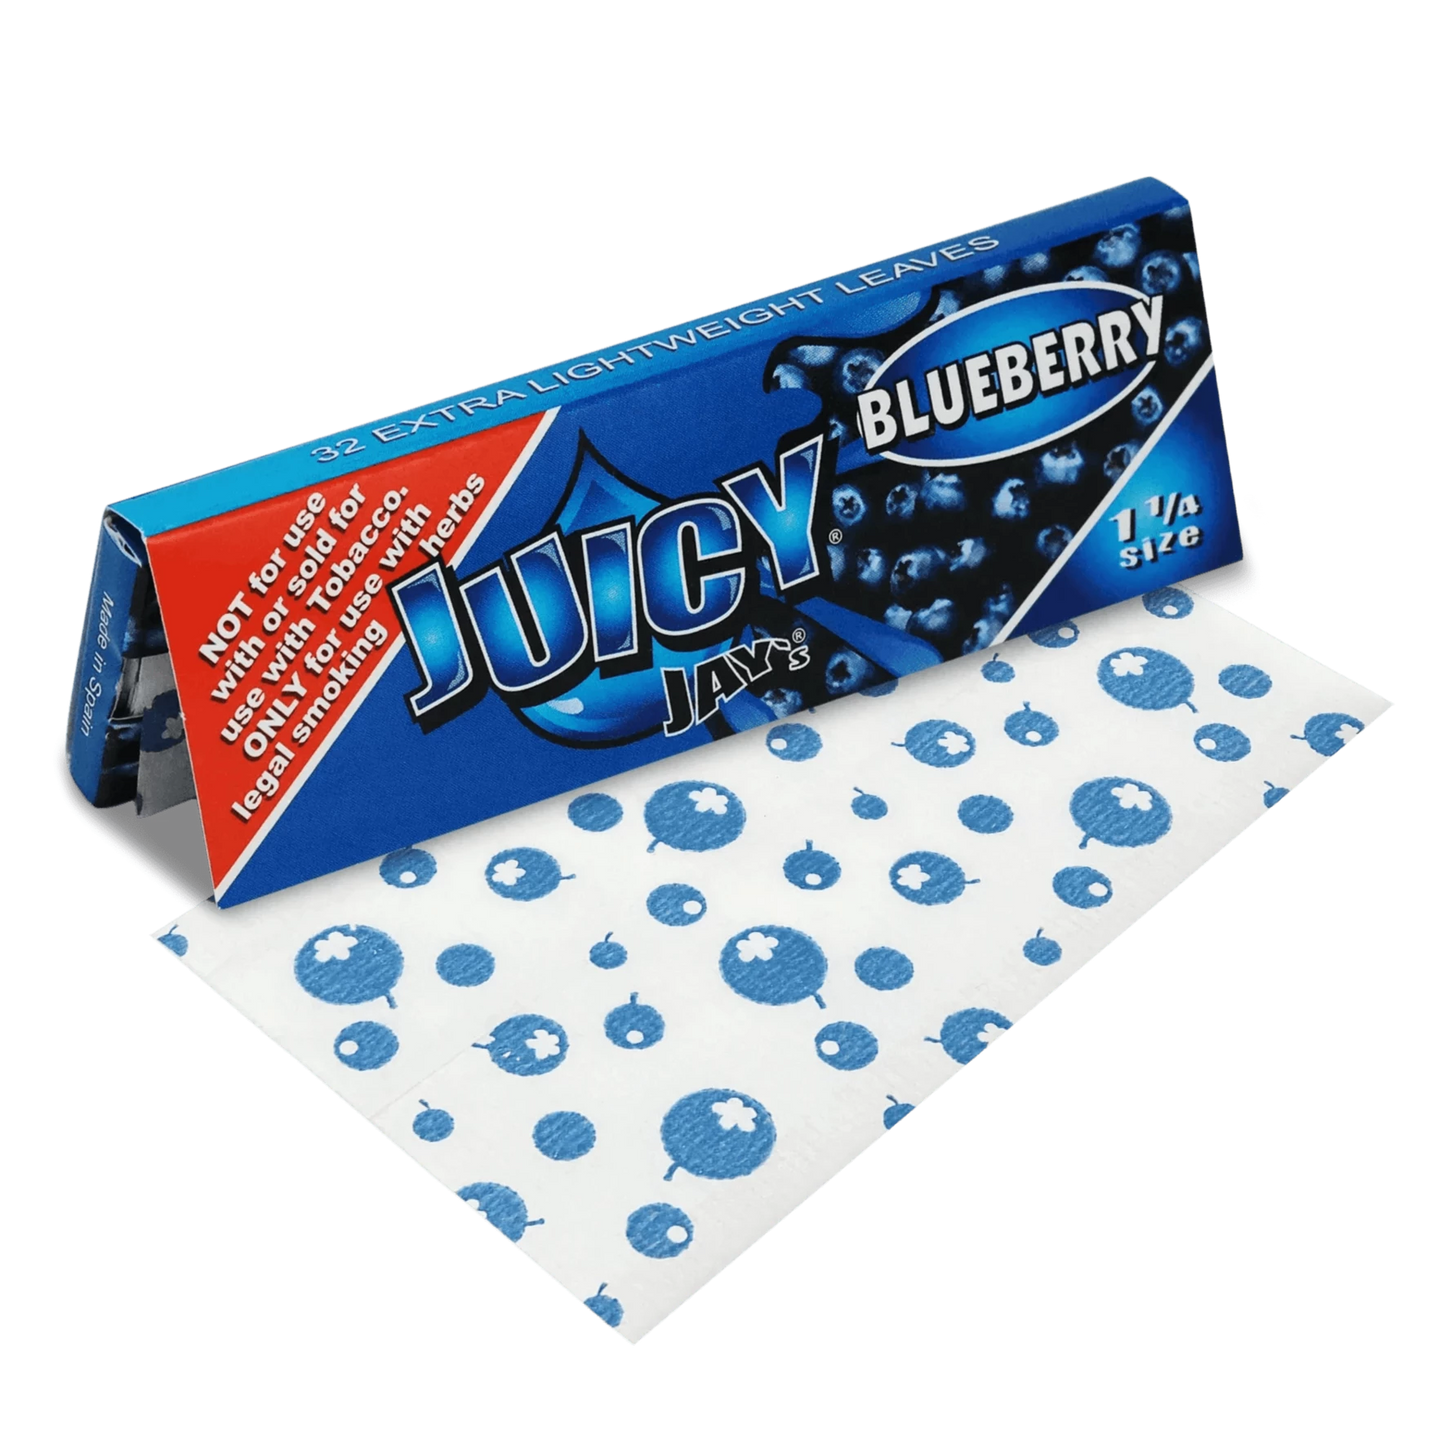 Juicy Jay's Blueberry Flavoured Paper 1/4